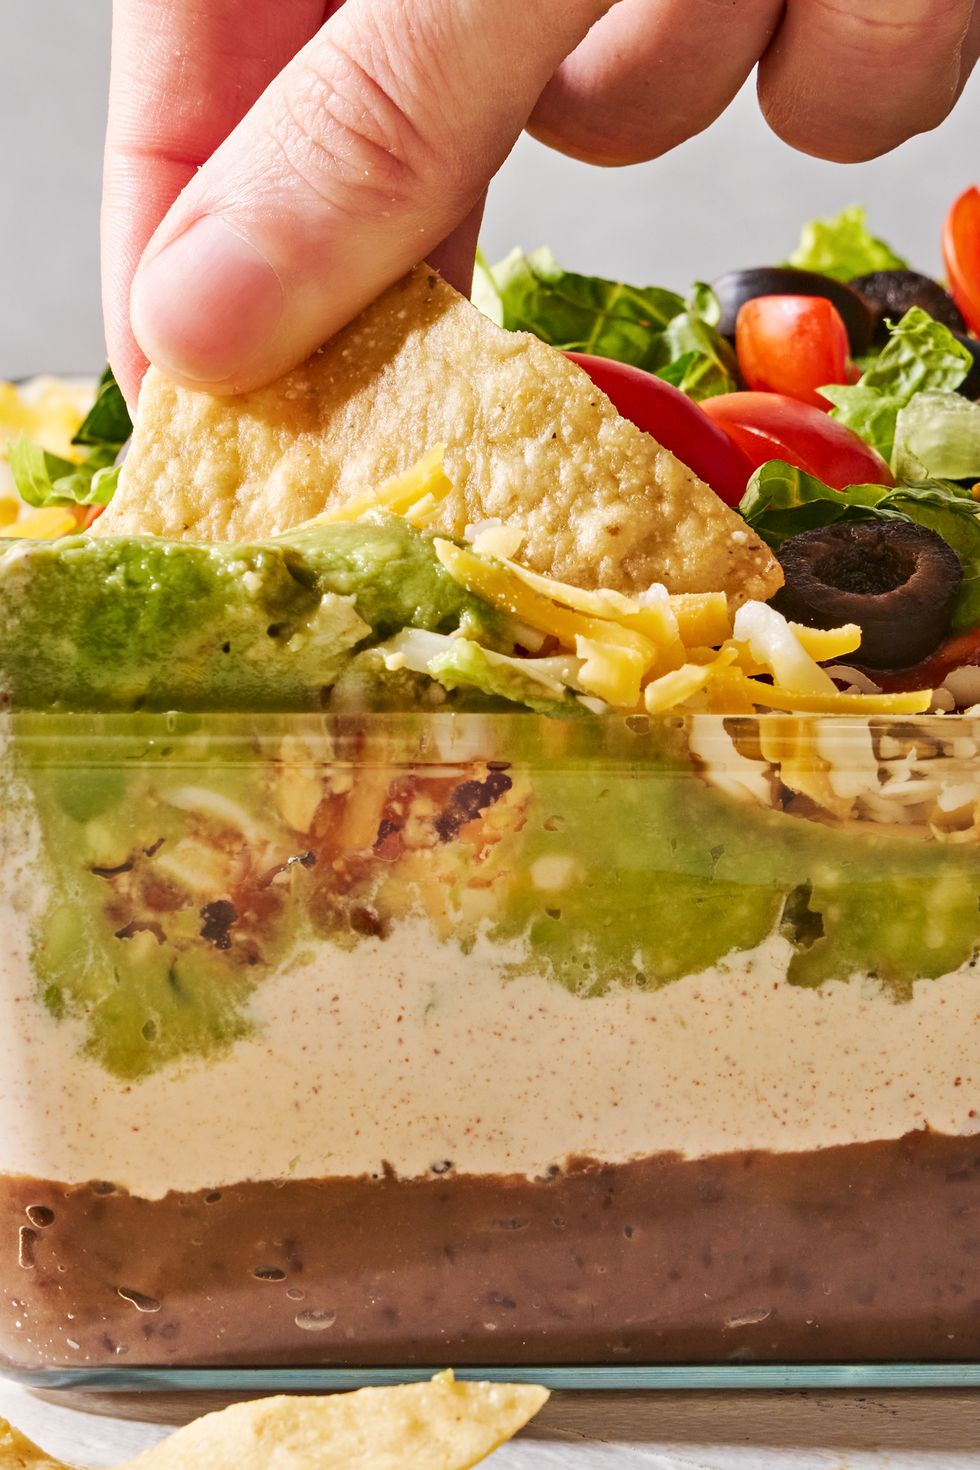 layered dip with refried beans, sour cream, guacamole, cheese, tomatoes black olives, and lettuce in a clear dish